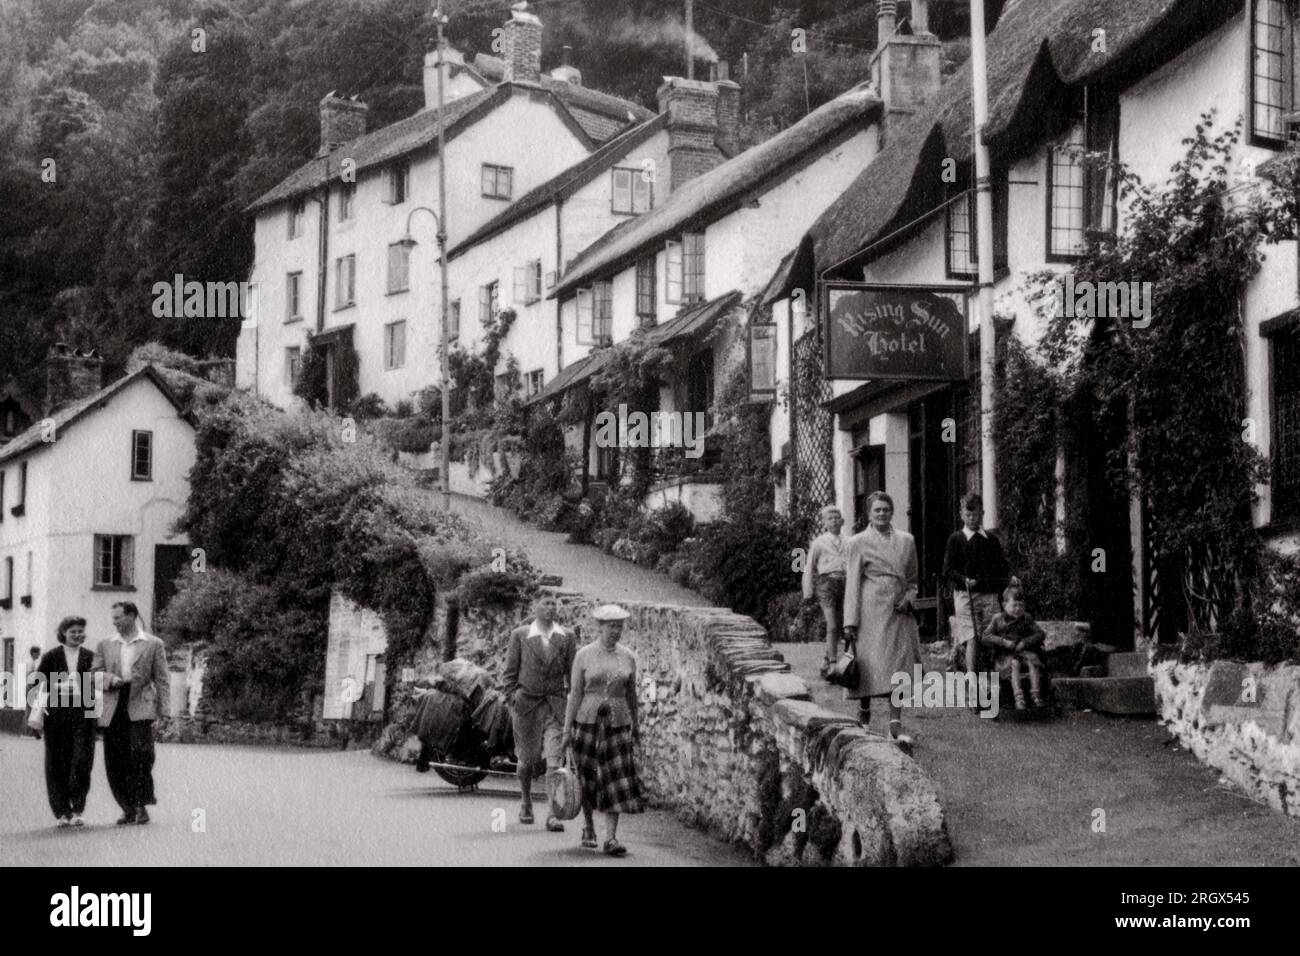 Lynmouth, Devon, England in the summer of 1952, “approximately three weeks before the Lynmouth flood disaster”, according to a hand-written note by the photographer.  The “flood disaster” occurred on the night of Friday 15 August 1952 when a wall of water and rubble hit the town and 34 people died.  Effectively, Lynmouth was destroyed and took six years to rebuild. Stock Photo